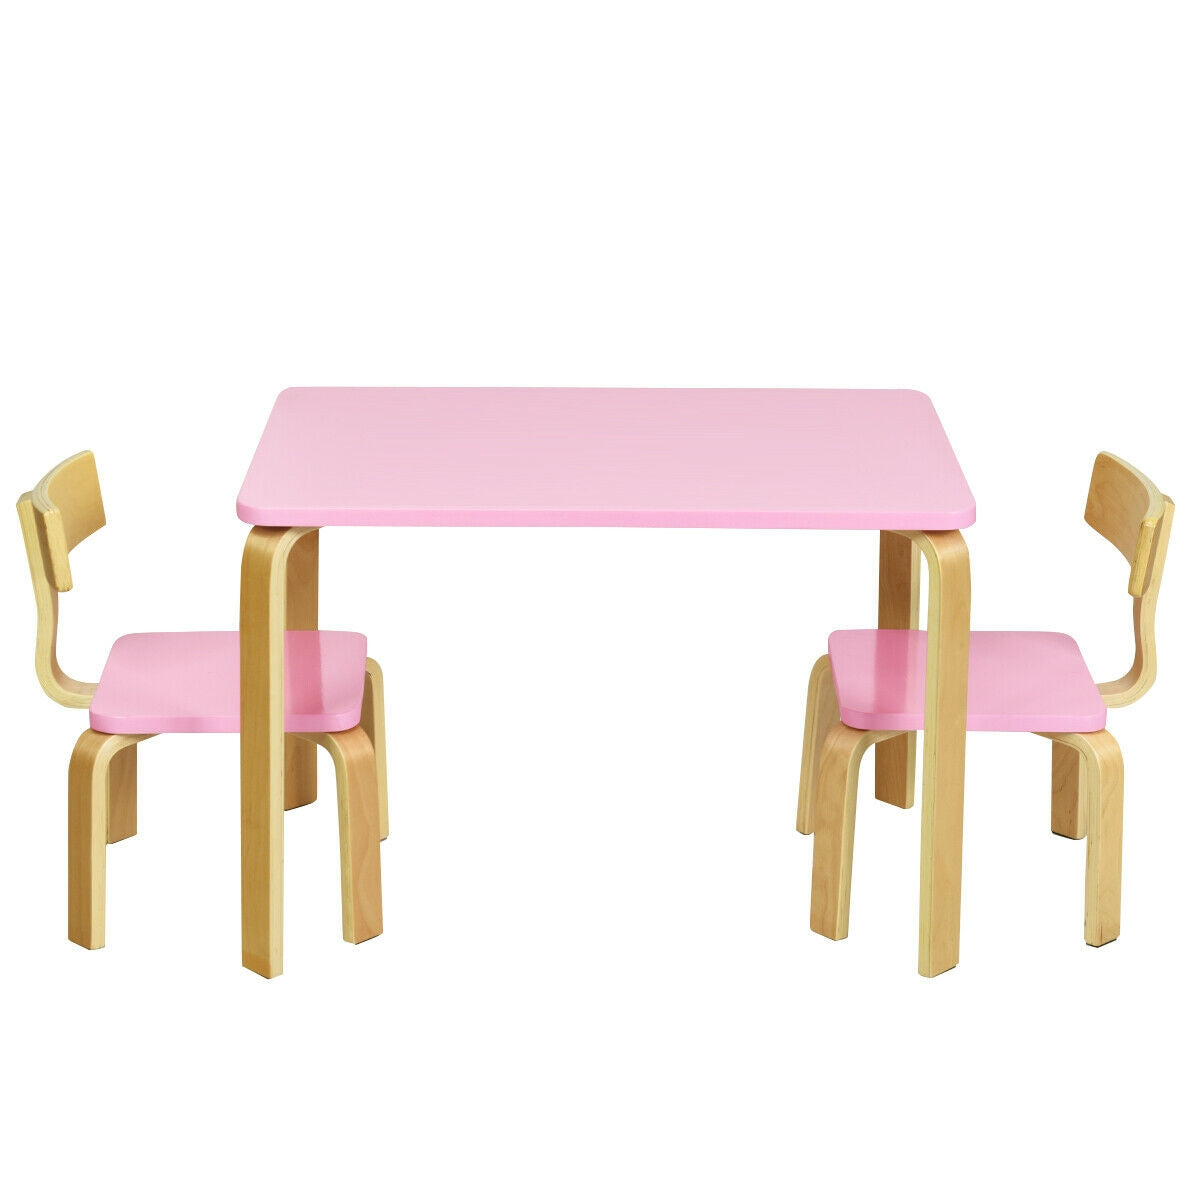 3 Piece Kids Wooden Activity Table and 2 Chairs Set for Reading and Writing